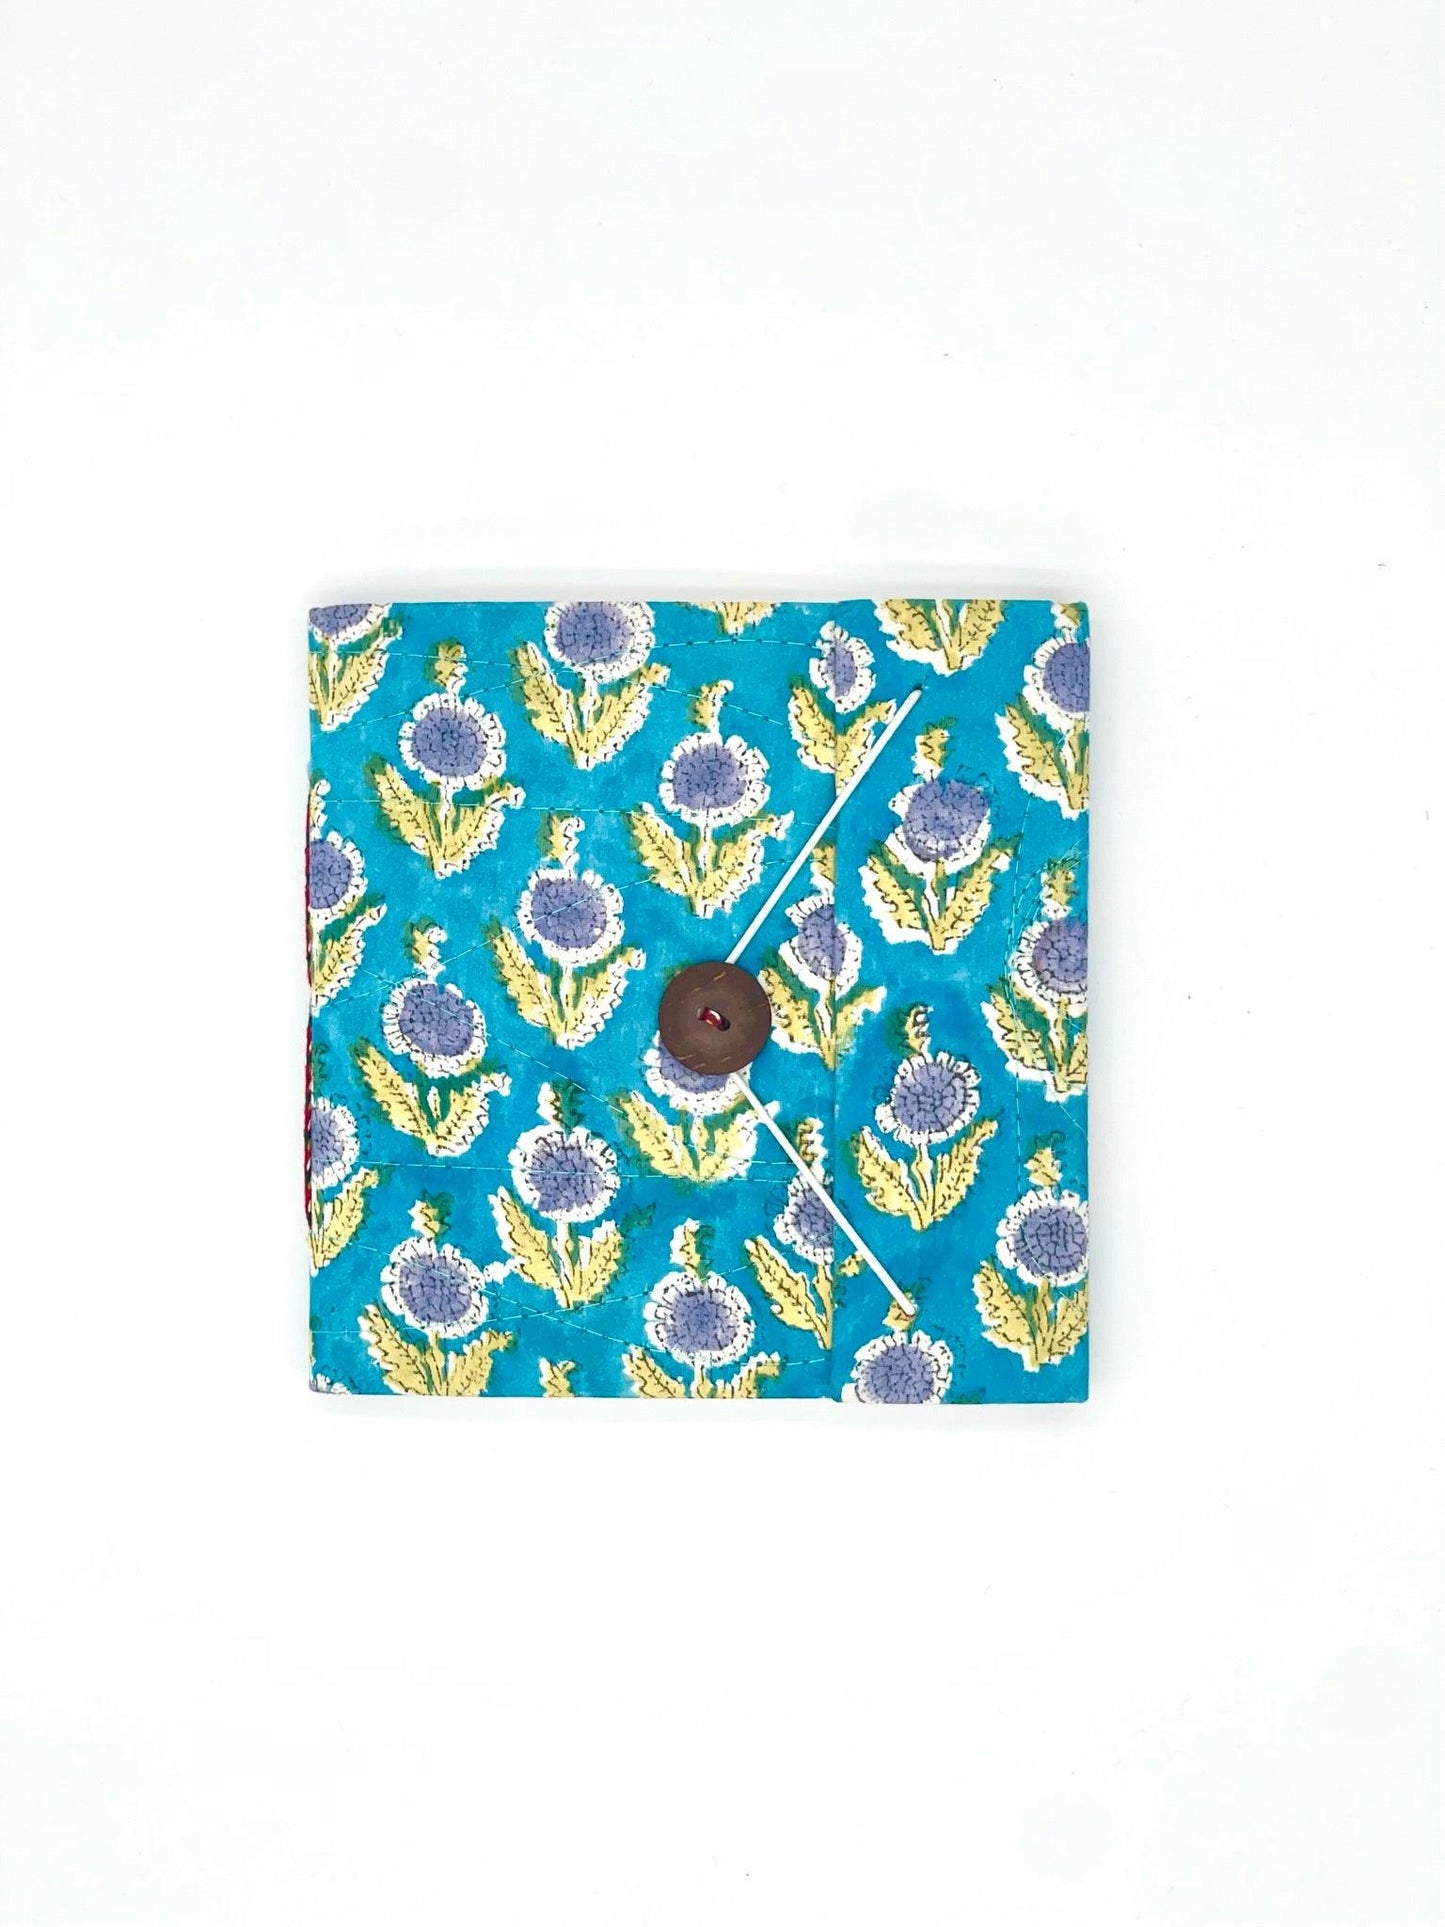 Block Print Journal/Notebook, Blue & Purple Wildflower - Unlined, 100 Pages, Thick Paper, Hard Cover - Transcend